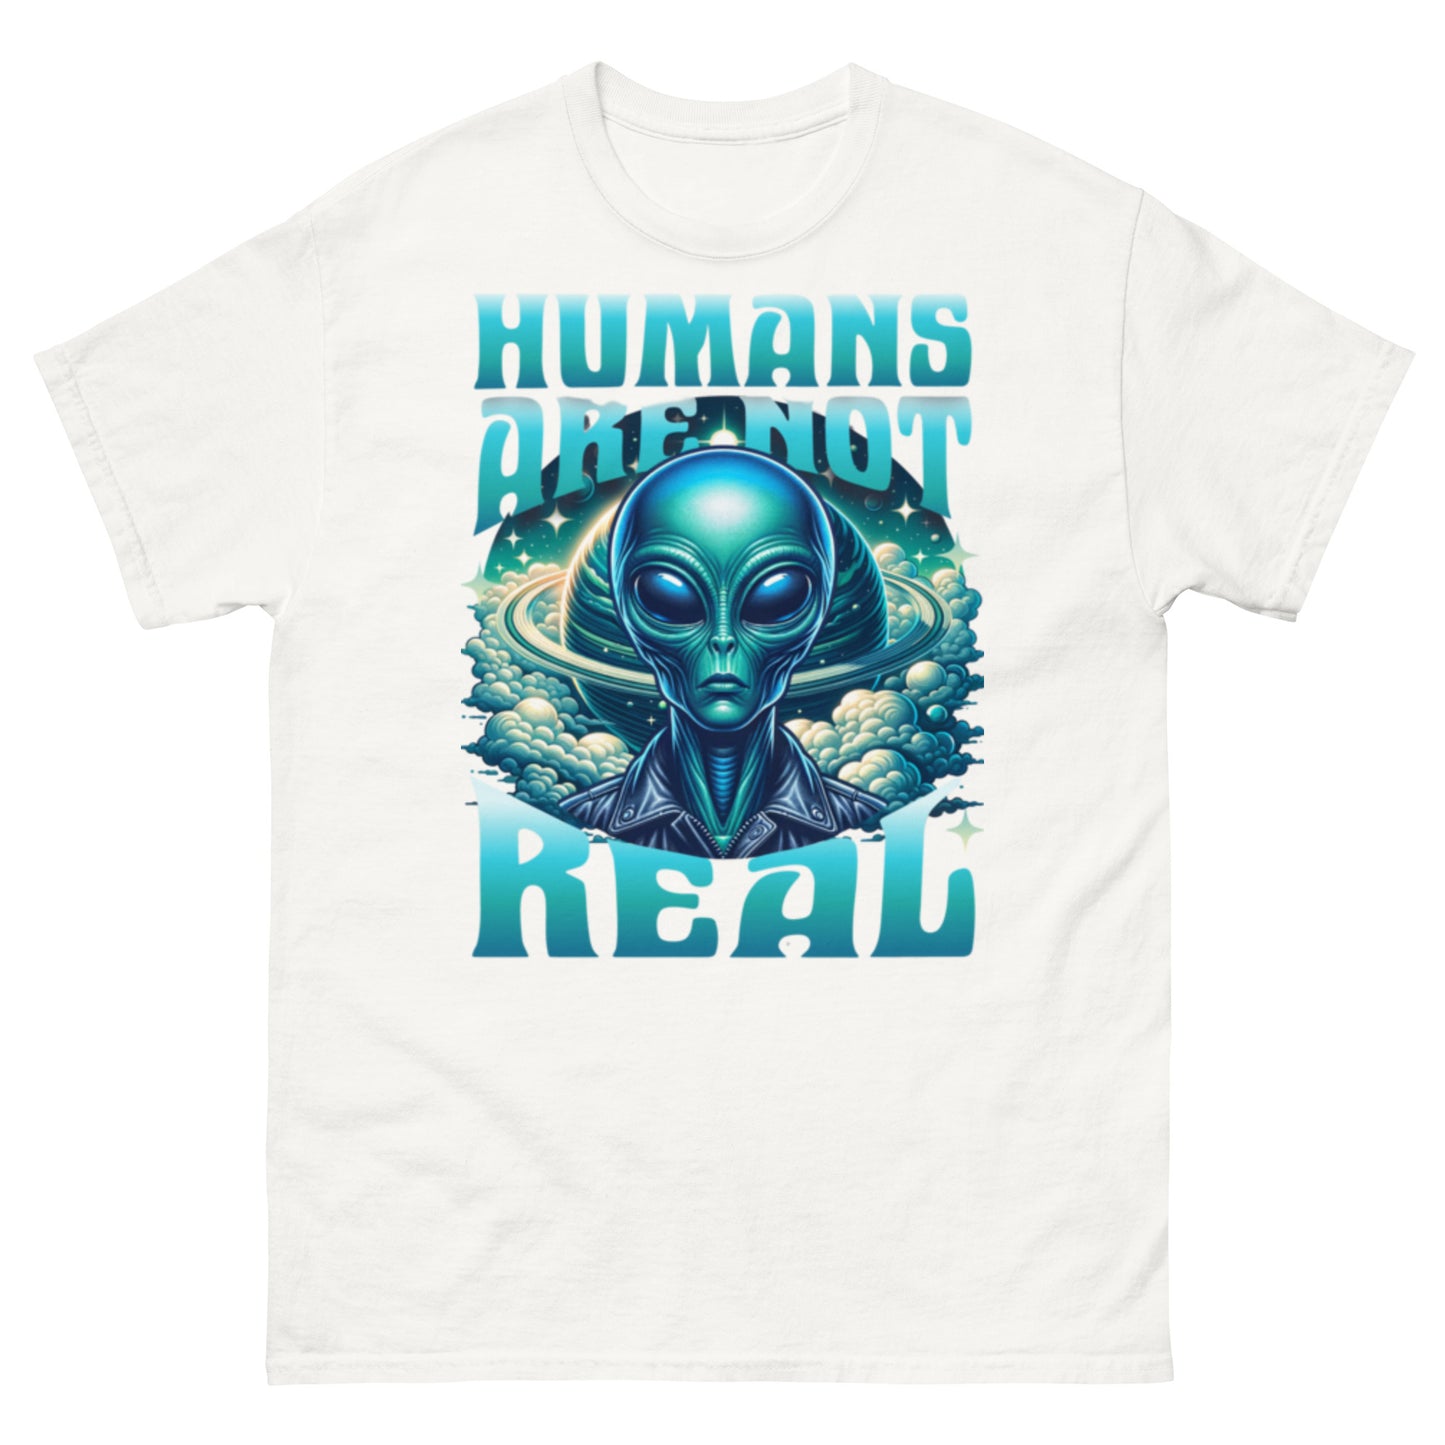 humans are not real Unisex classic tee